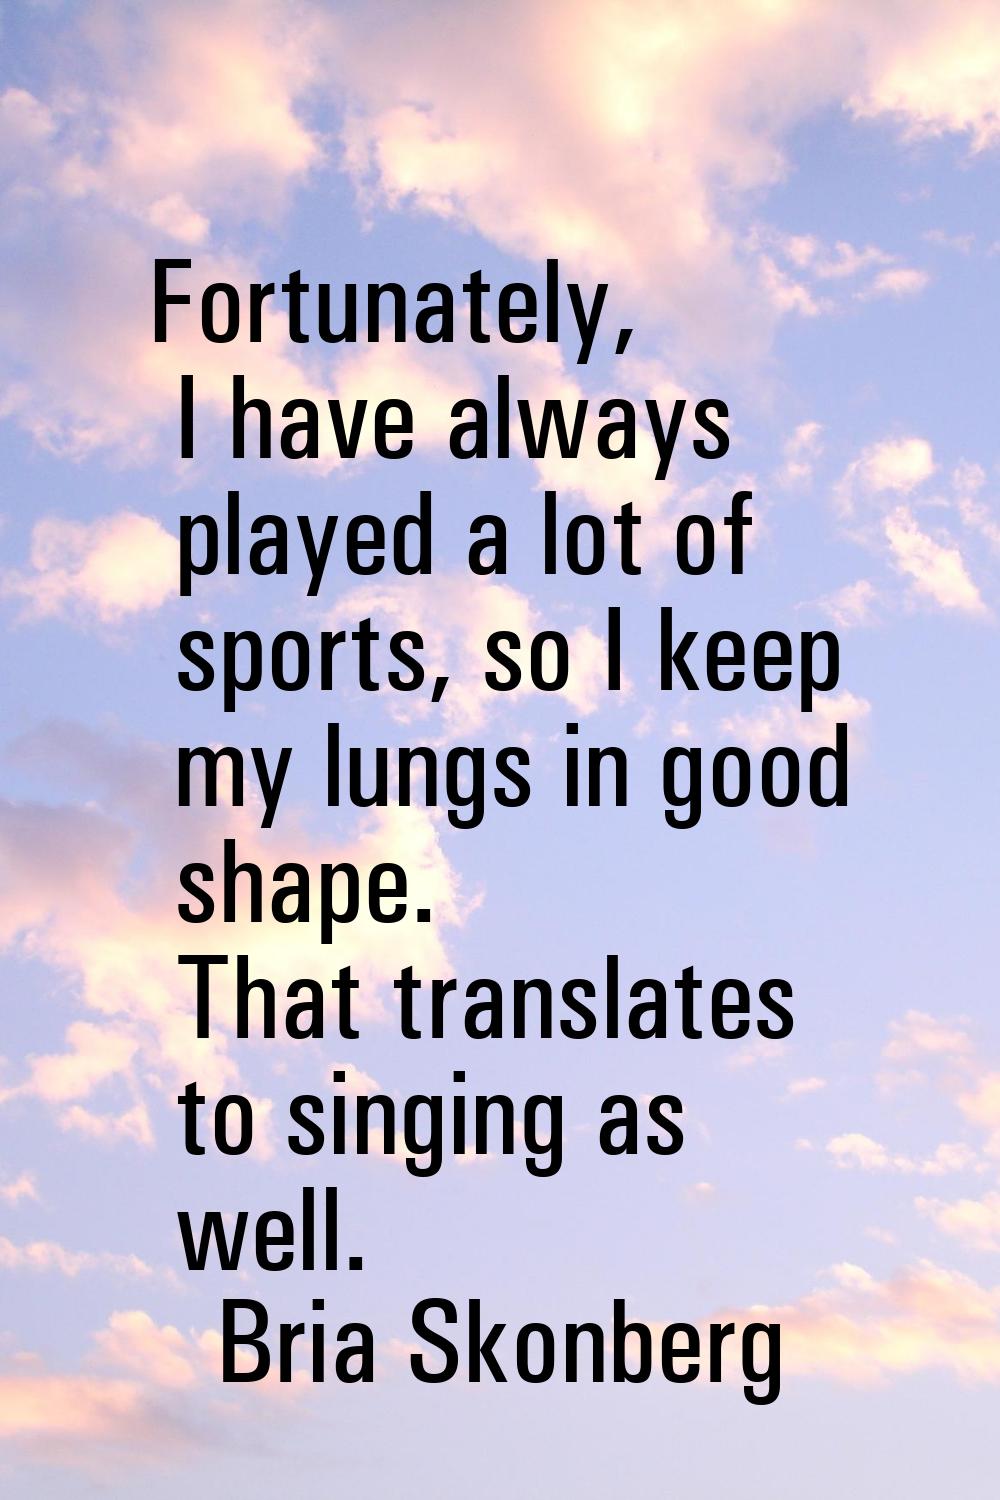 Fortunately, I have always played a lot of sports, so I keep my lungs in good shape. That translate